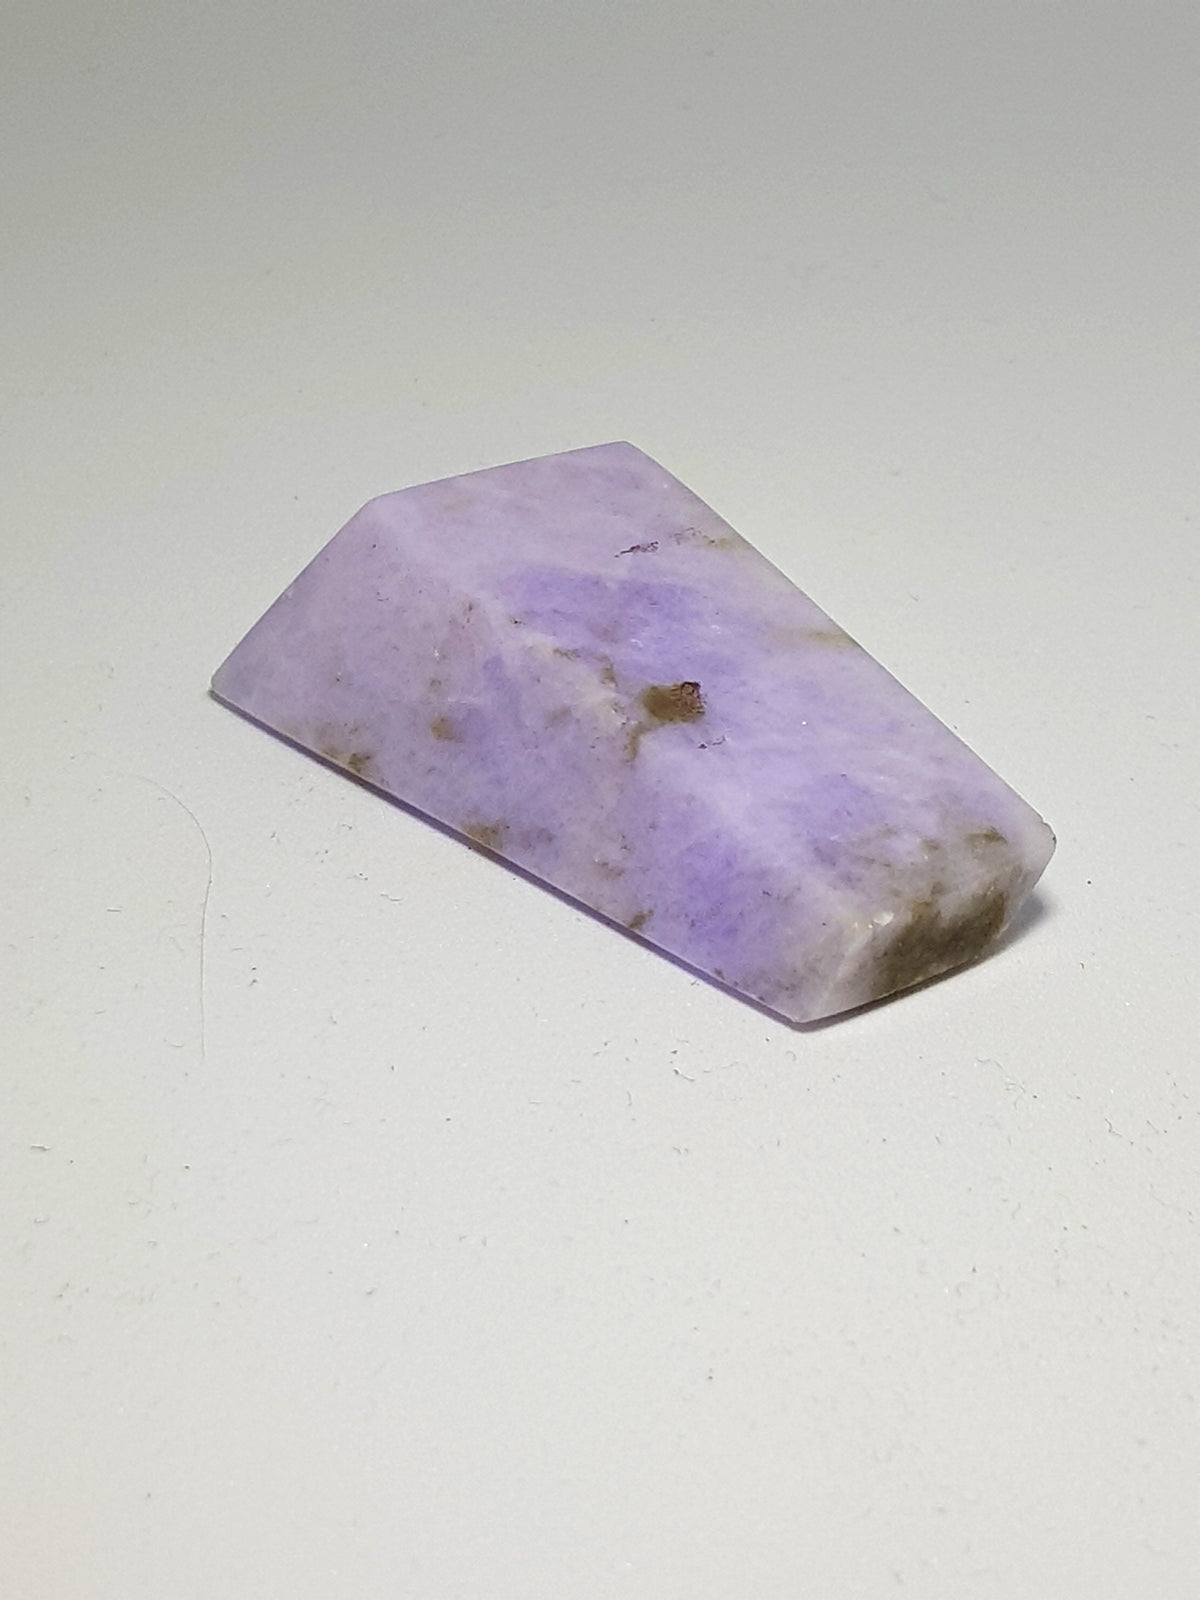 Lavender jadeite (Burma). A small angular freeform of jadeite. The sample is a deep lavender purple, with a few brown inclusions. 